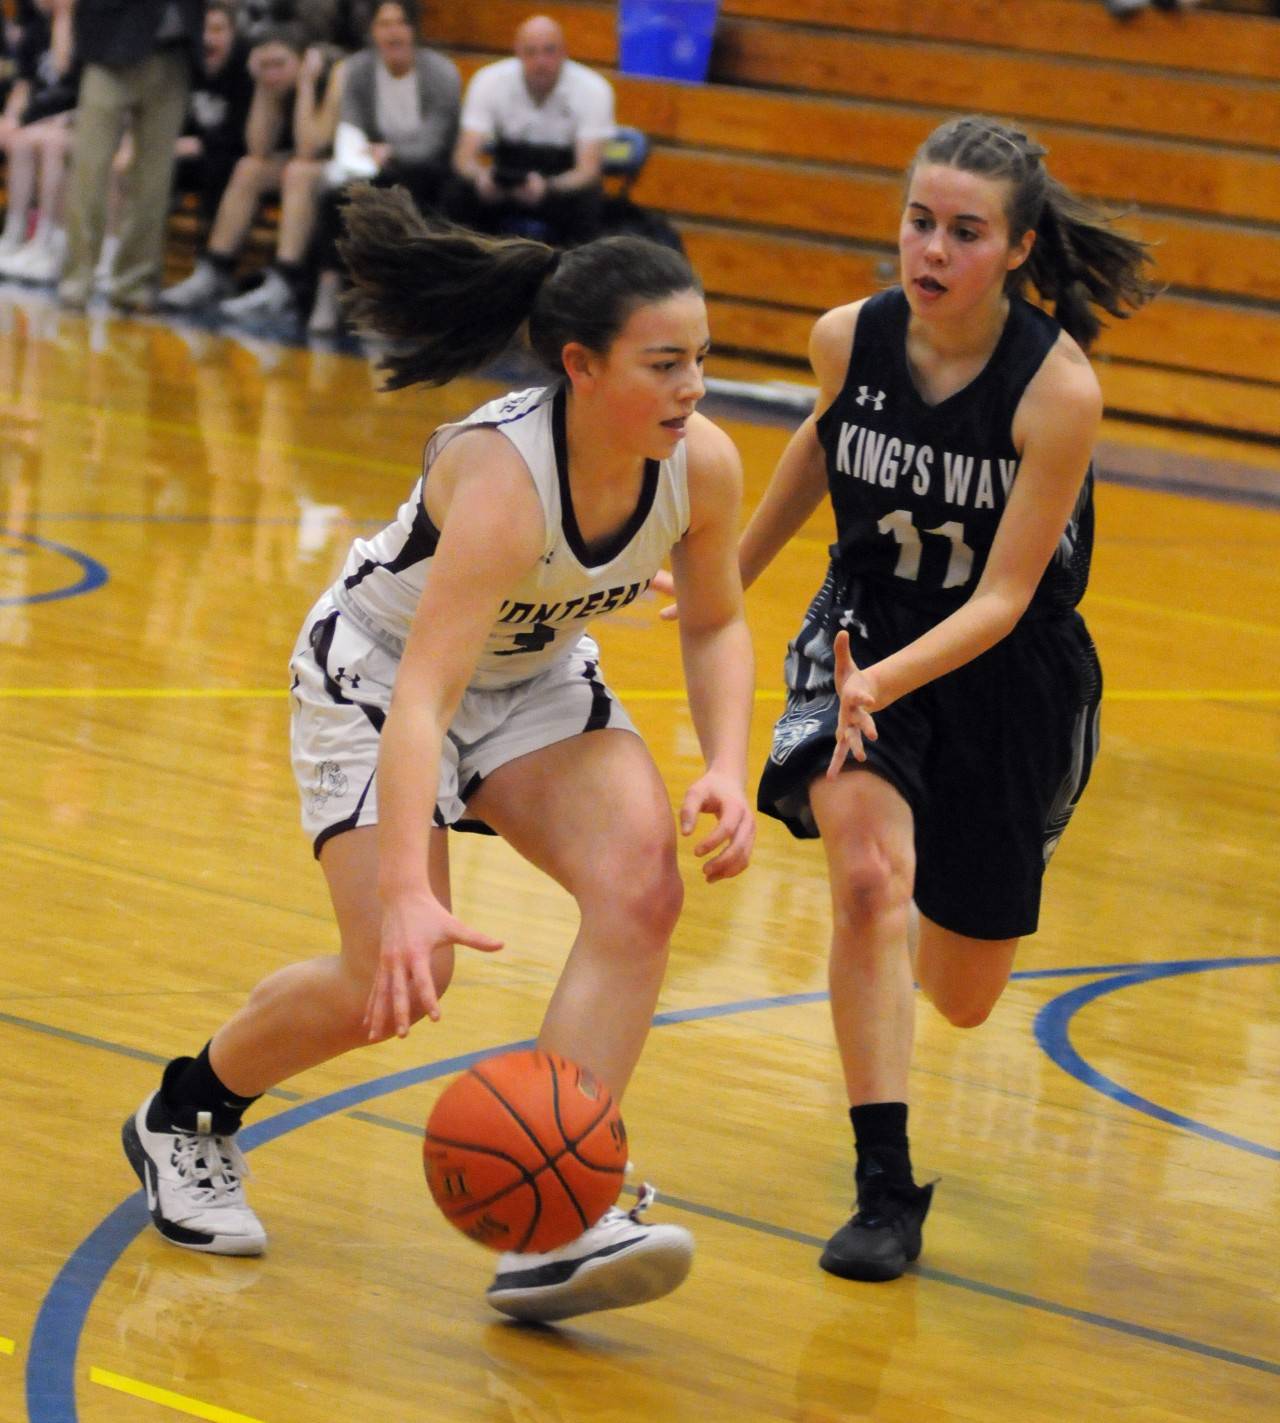 Montesno’s Jaiden King, left, dribbles while being defended by King’s Way Christian’s Annabelle Atwood during Montesano’s 43-29 elimination-game victory on Wednesday at Rochester High School. (Ryan Sparks | Grays Harbor News Group)